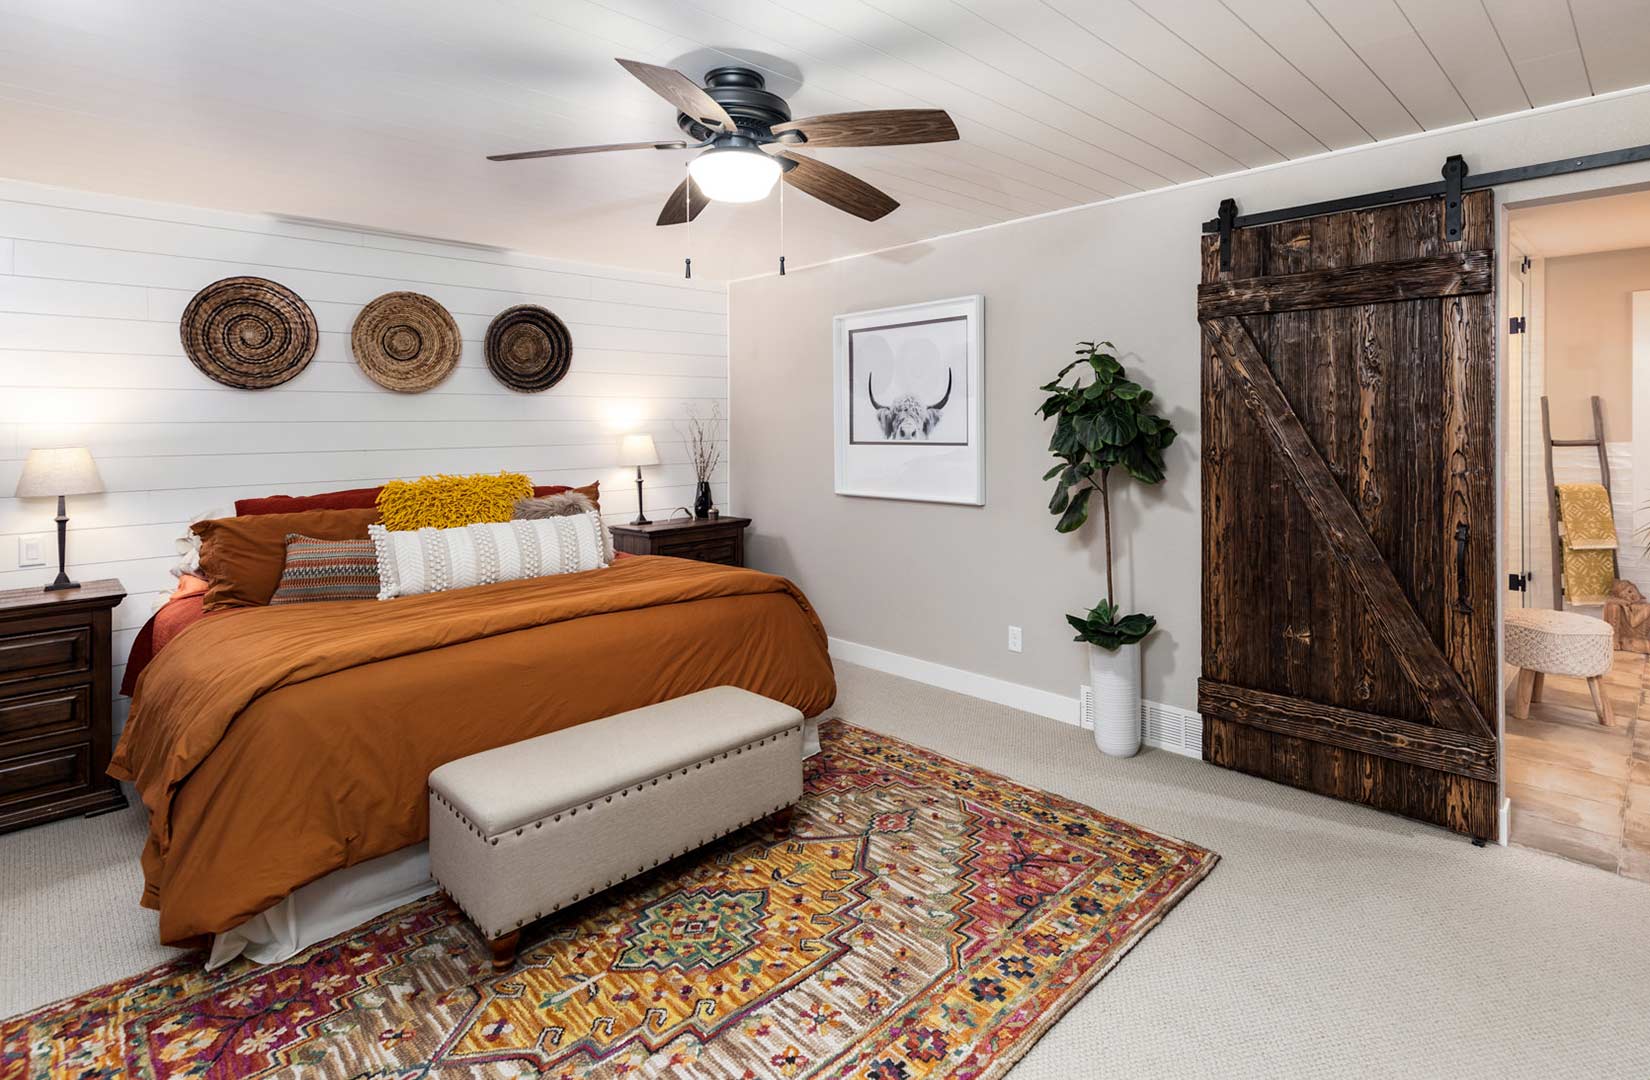 Primary bedroom with warm bohemian colors and dark wood tones with a featured barn wood sliding door created by Freestone Design-Build.